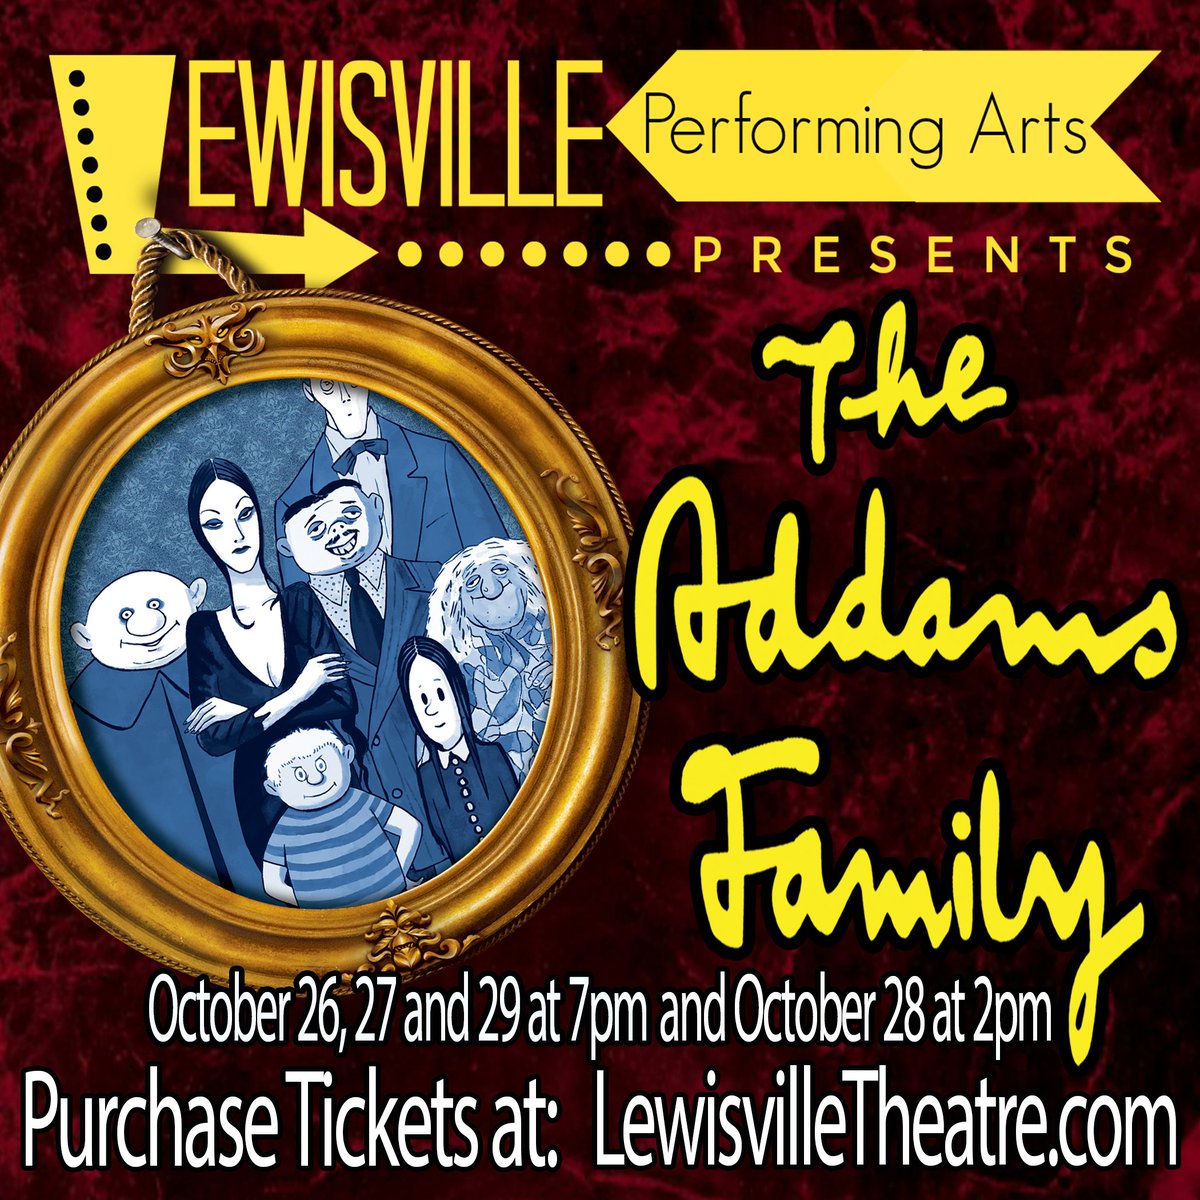 Tickets are on sale now!!!!! Go get your seat to see this show! #LTGetsSpooky #AddamsFamilyMusical lewisvilletheatre.com